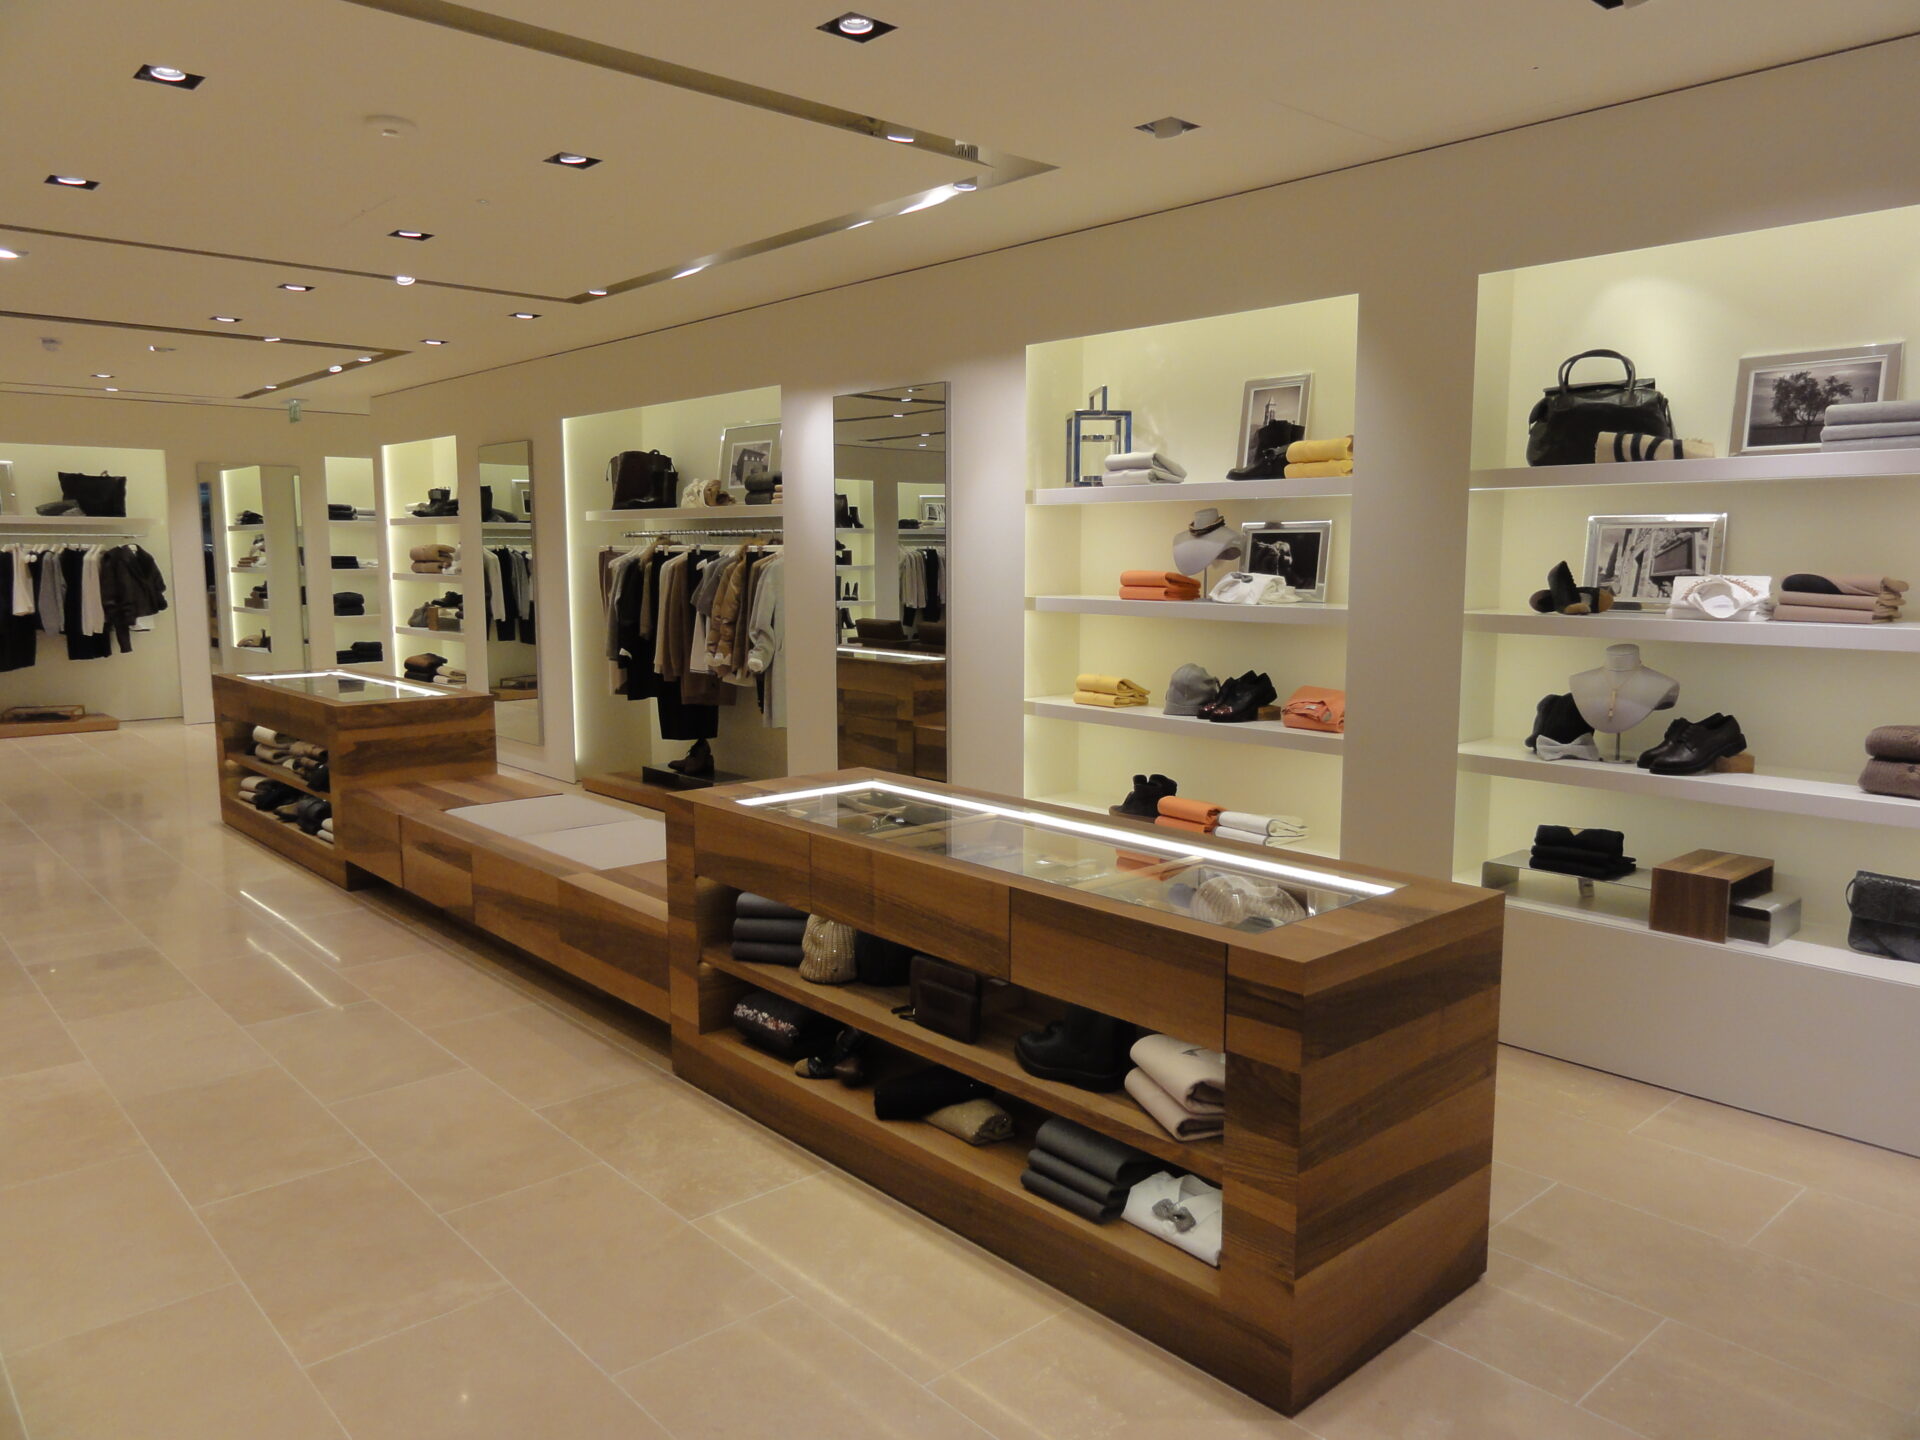 Ultra-modern interiors of the Brunello Cucinelli Mayfair shop. Part of the Cat B fit out involved the installation of bespoke lighting within cabinets to illuminate clothing.